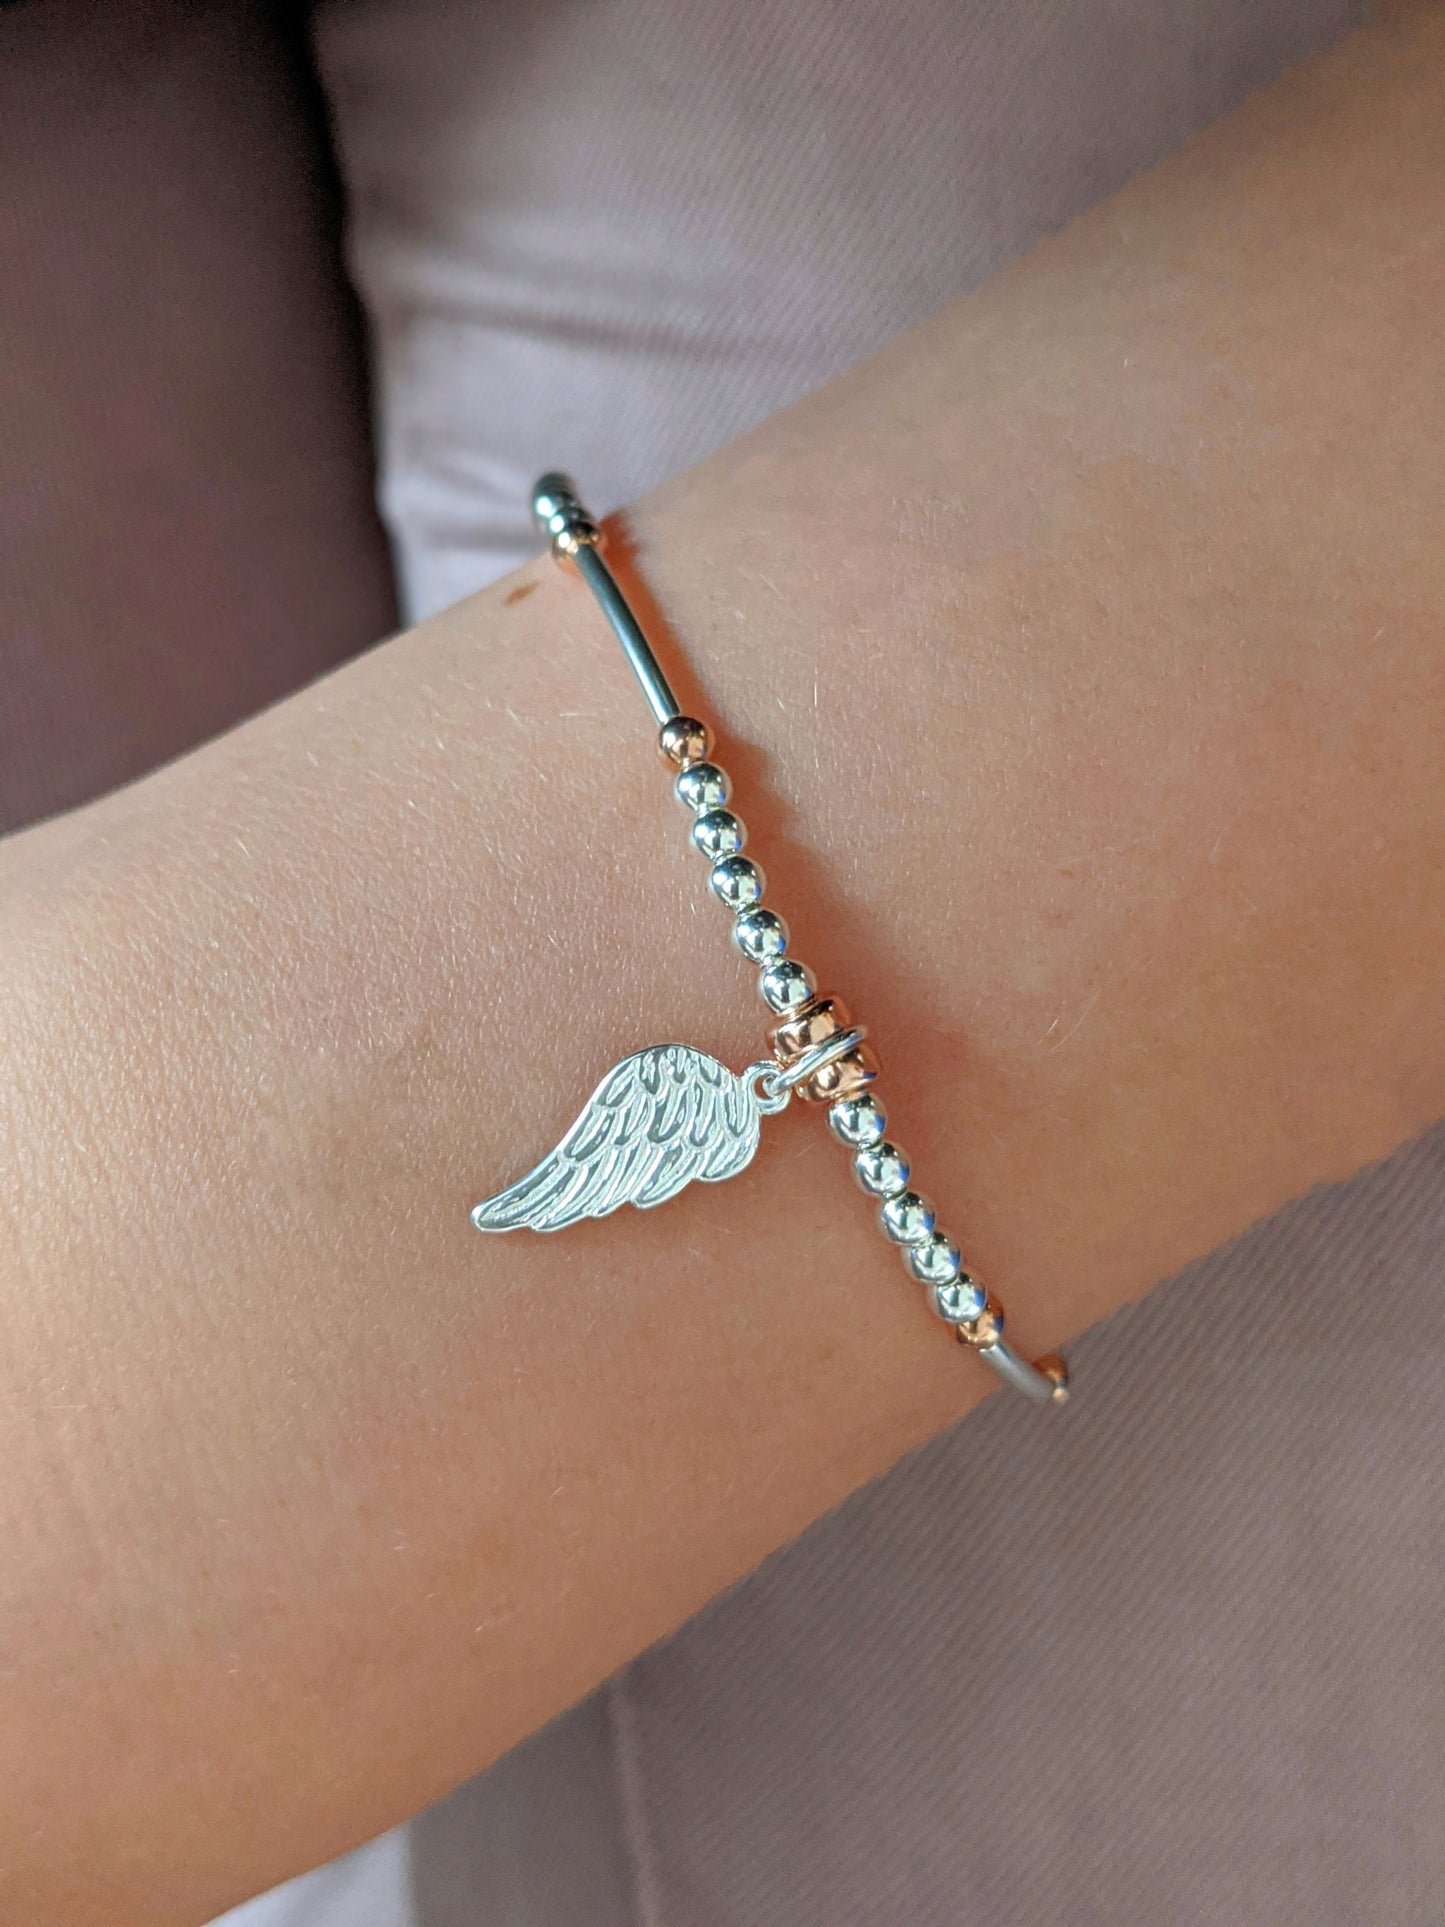 Amazon.com: Angel Wing Bracelet Spiritual Jewelry Faith Gift for Mom  Daughter Her Slide on Bangle Avg Size Woman : Handmade Products